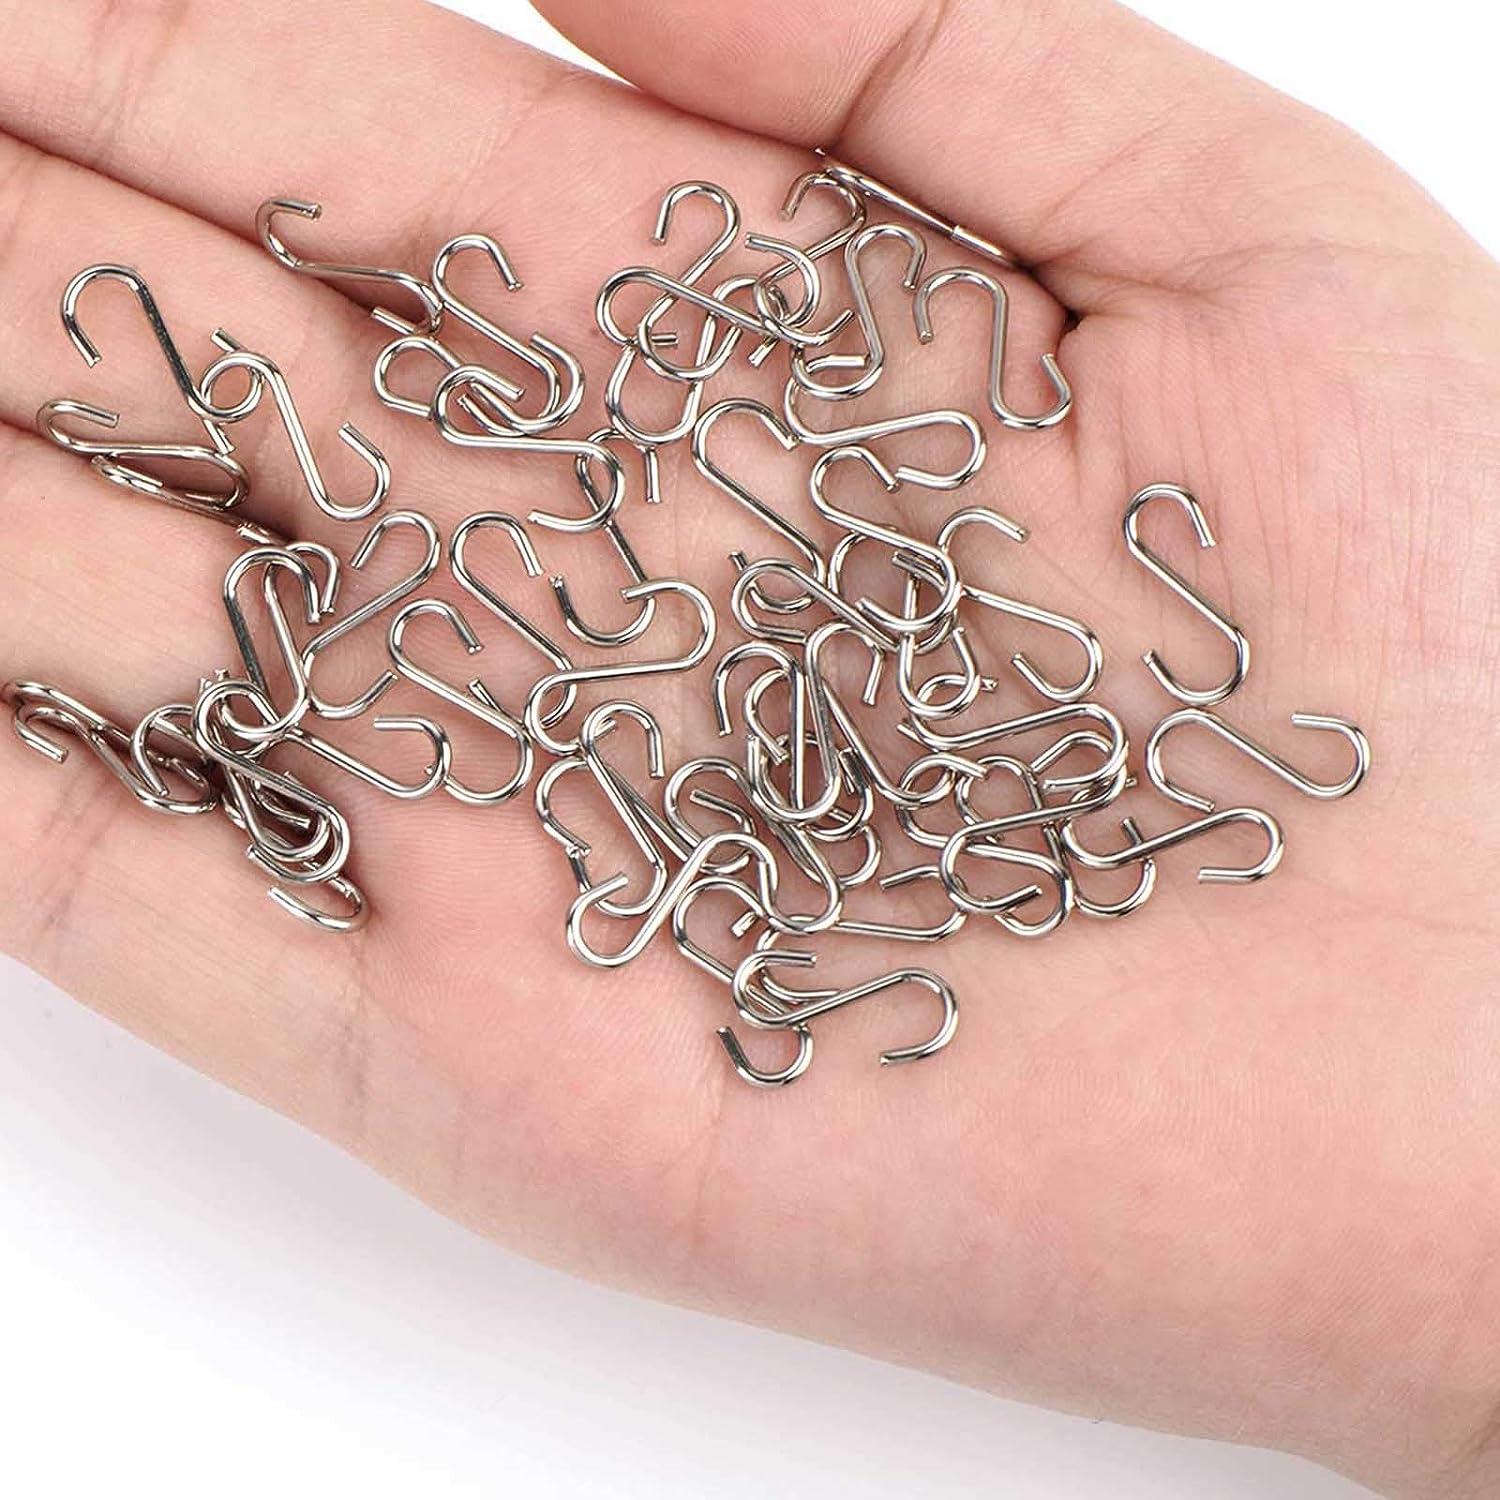 Mini S Hooks Connectors S Shaped Wire Hook Hangers 200pcs Hanging Hooks for  DIY Crafts, Hanging Jewelry, Key Chain, Tags, Fishing Lure, Net Equipment  (0.59 Inch) 